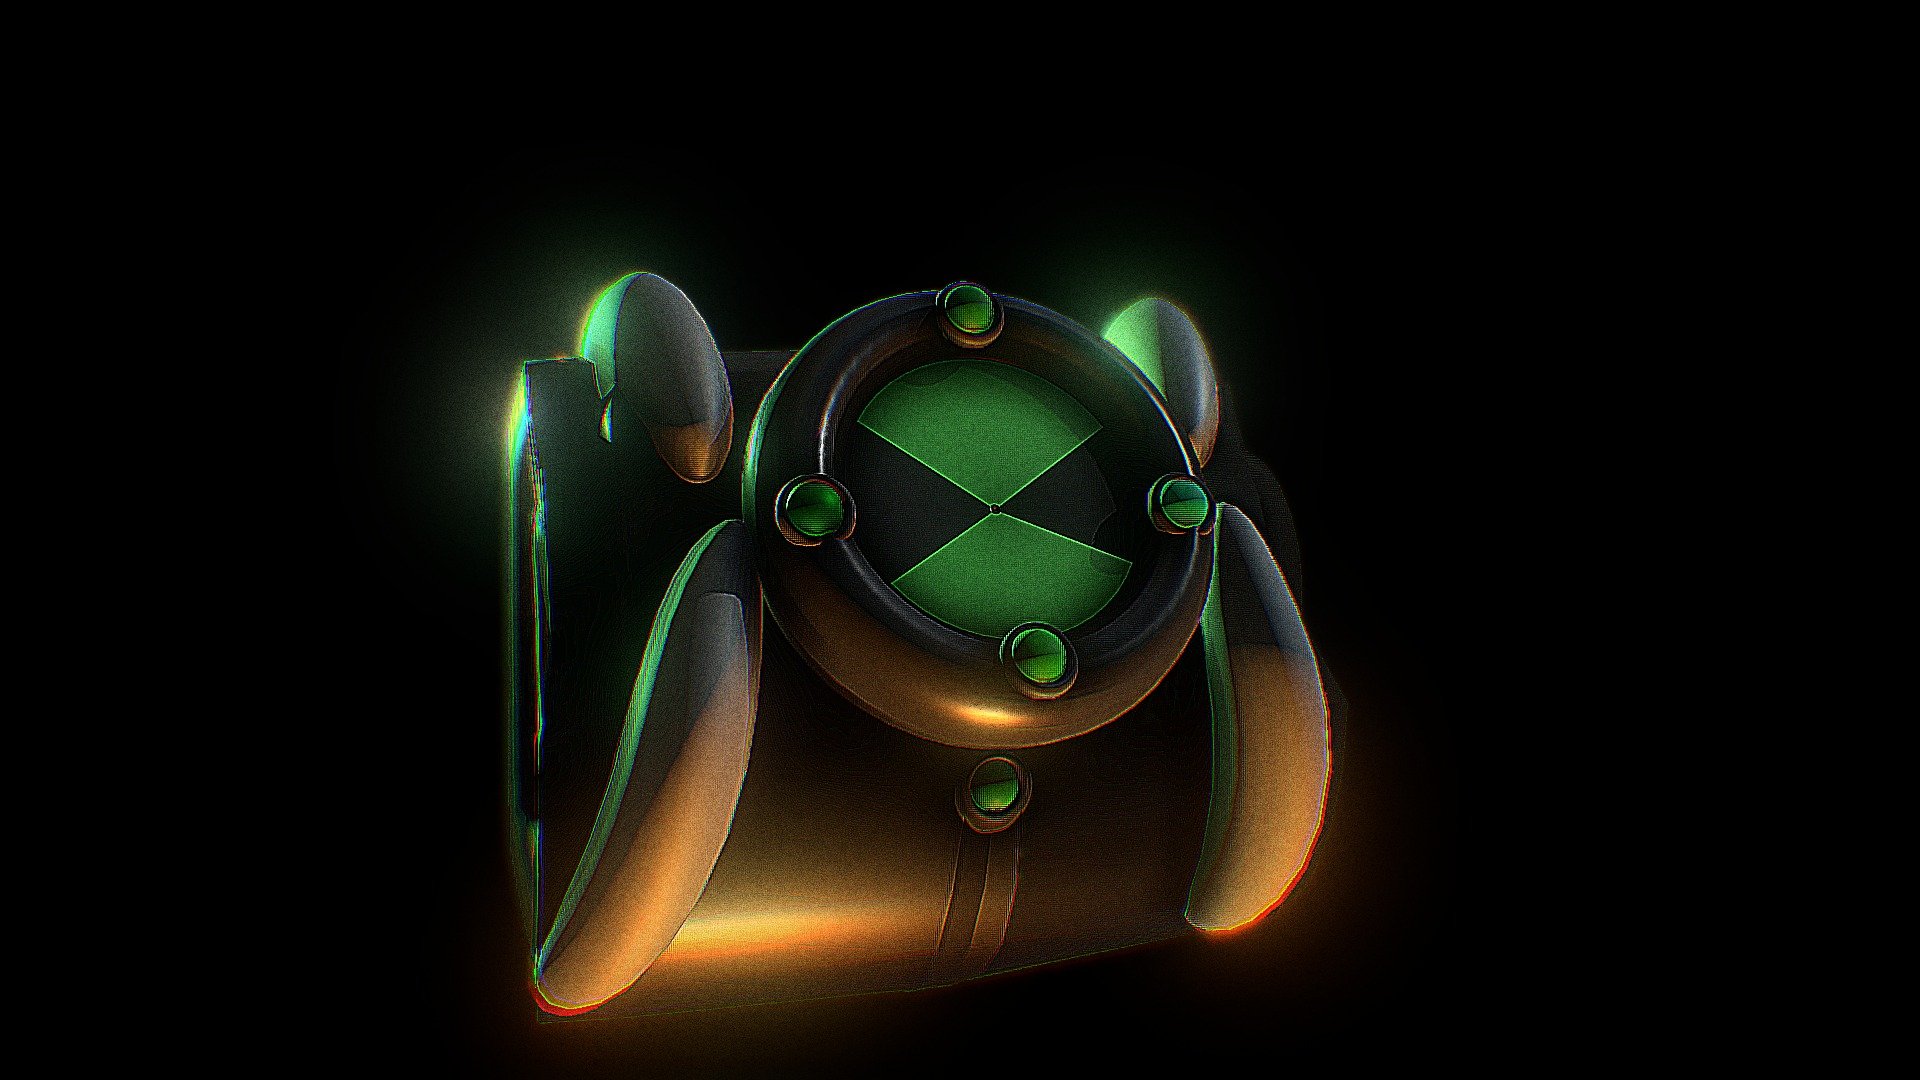 ben 10 is a pretty good show so i hope you enjoy this watch - Ben 10 omnitrix - 3D model by WillBourke (@KaboomAnimations) 3d model